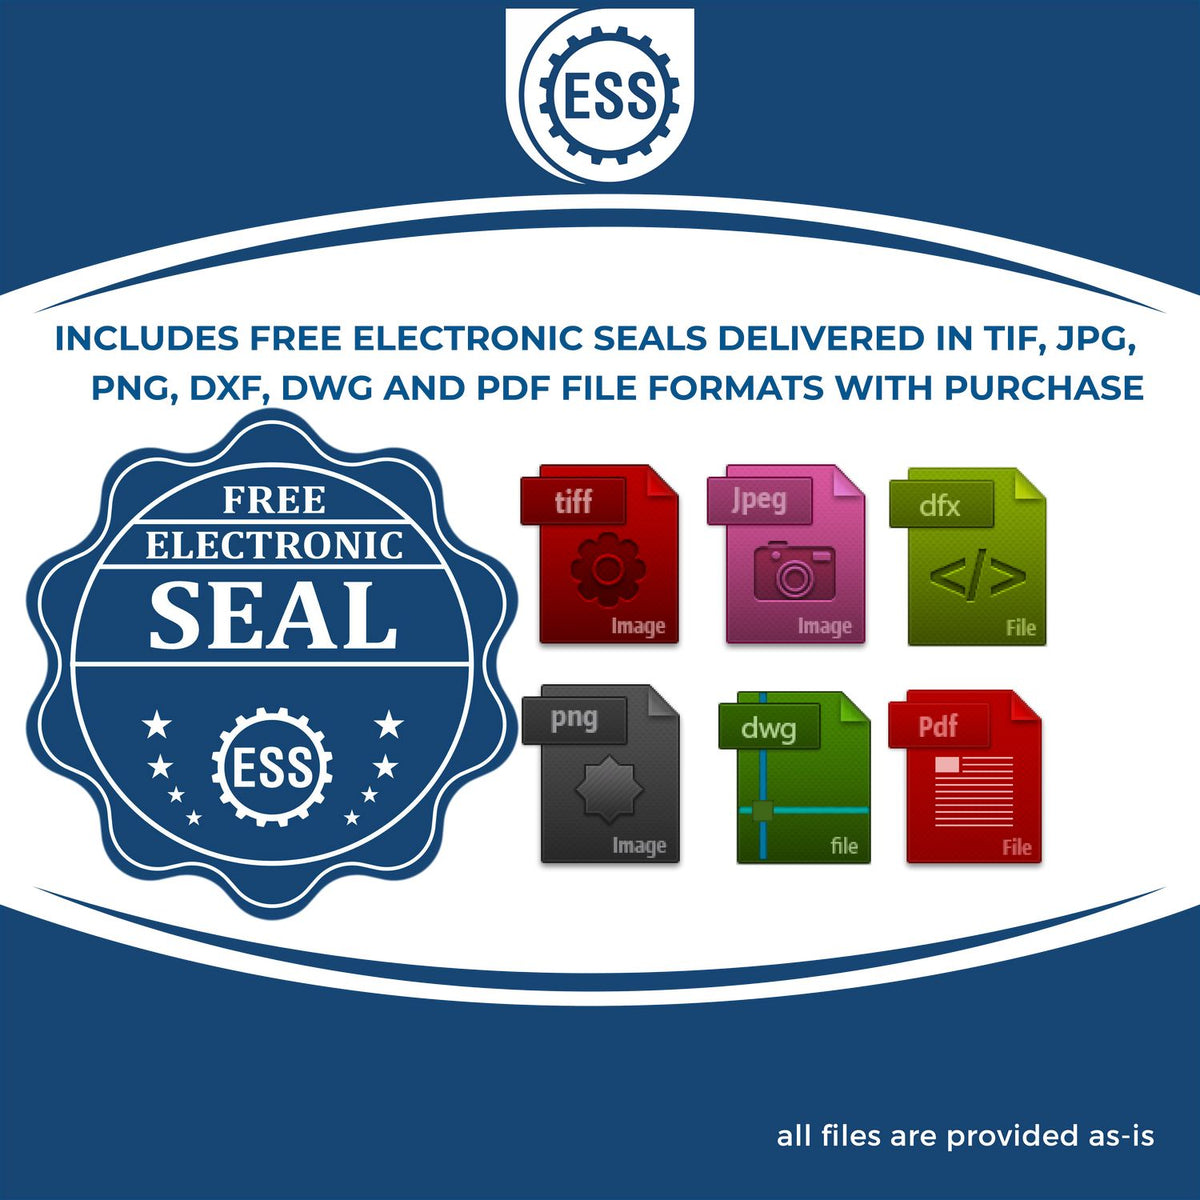 An infographic for the free electronic seal for the Premium MaxLight Pre-Inked North Dakota Landscape Architectural Stamp illustrating the different file type icons such as DXF, DWG, TIF, JPG and PNG.